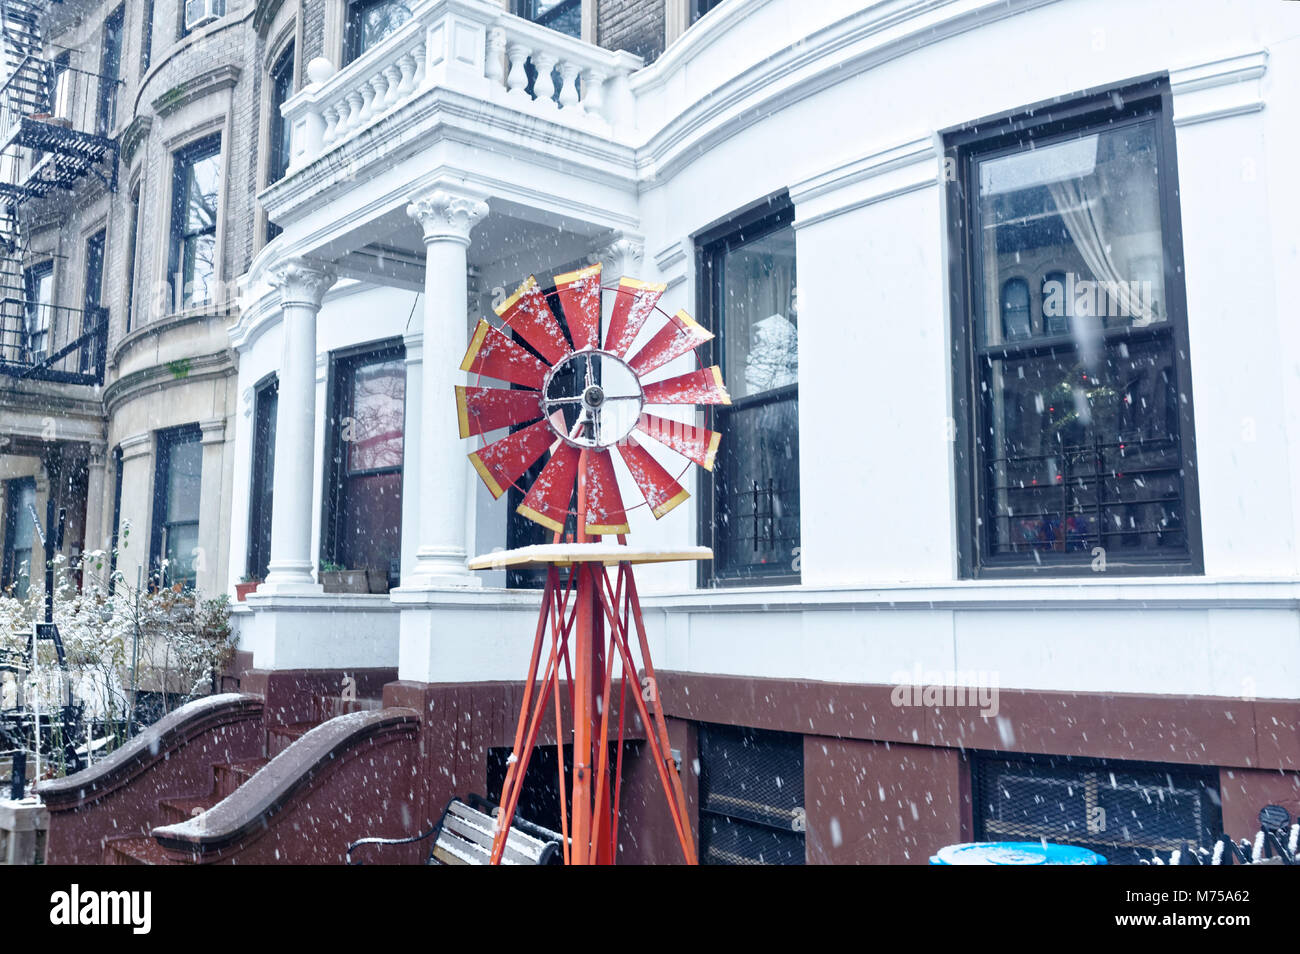 Small red decorative windmill in an urban neighborhood during a light snowfall. Stock Photo